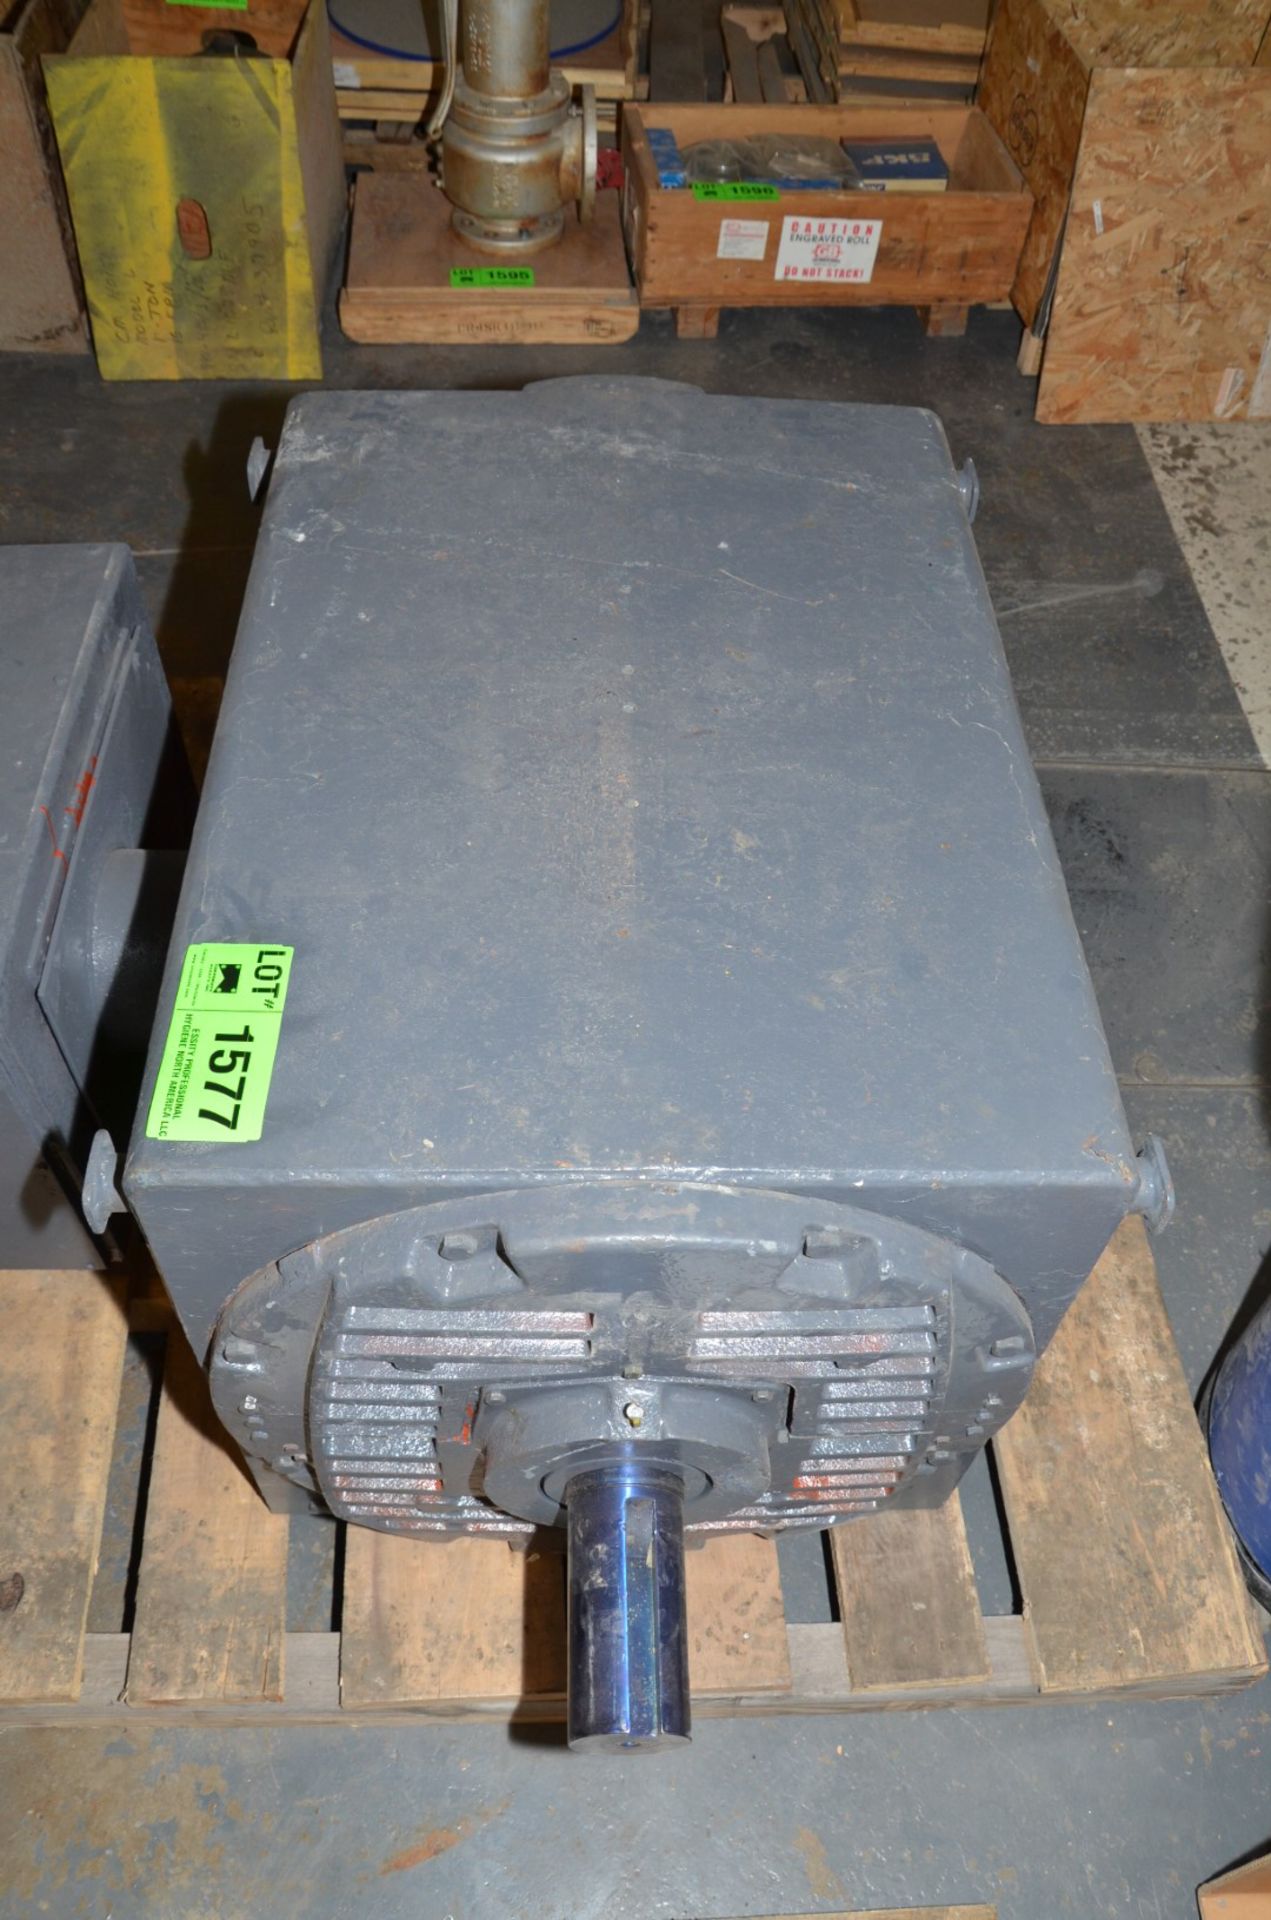 GE 300 HP 885 RPM ELECTRIC MOTOR [RIGGING FEE FOR LOT #1577 - $50 USD PLUS APPLICABLE TAXES] - Image 2 of 3